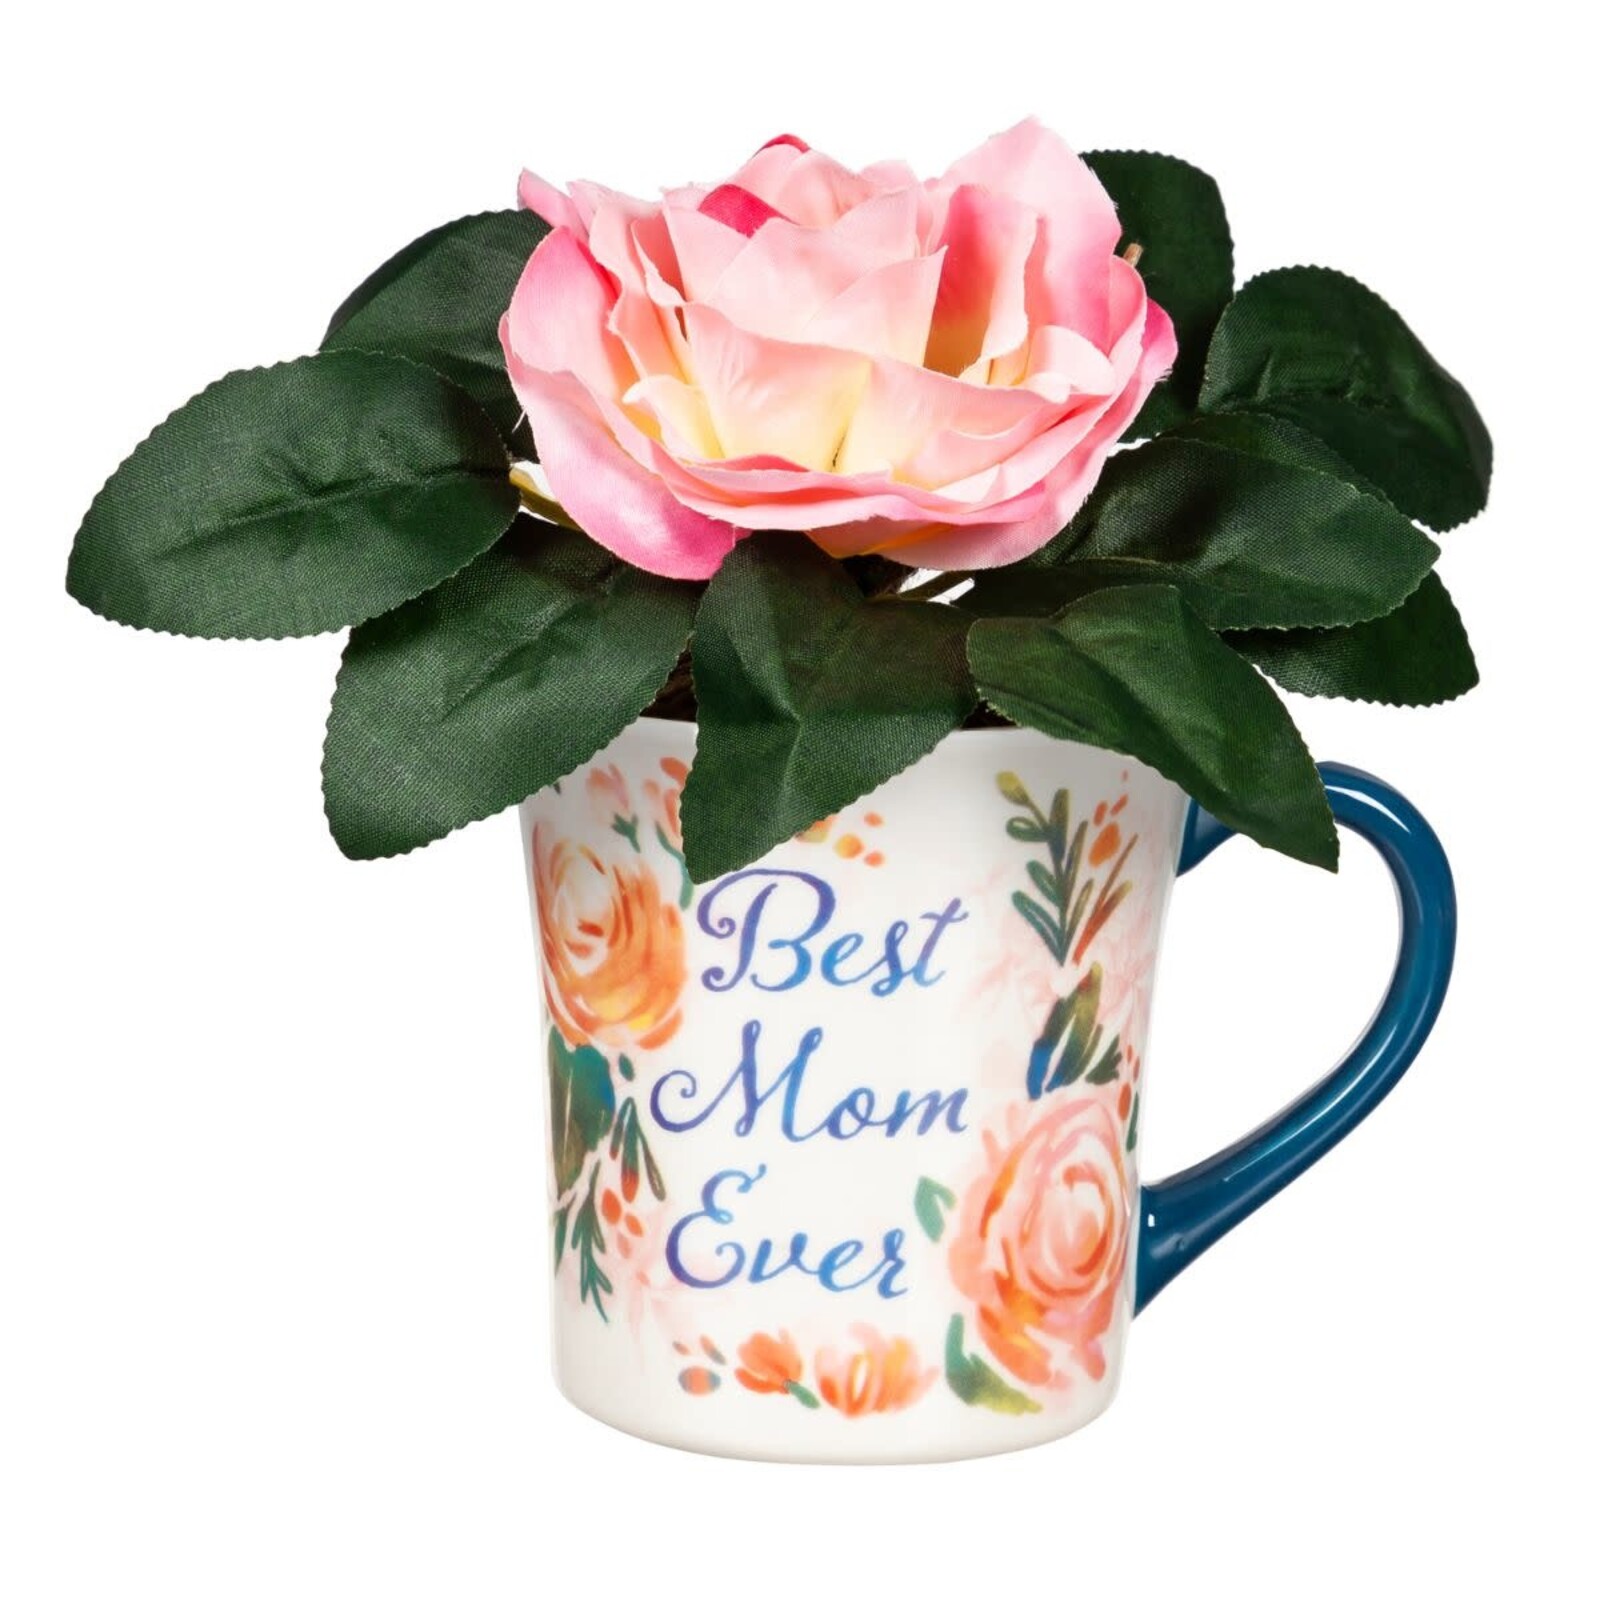 Evergreen Enterprises Coffee Cup and Floral Gift Set, Best Mom Ever P3758005 loading=